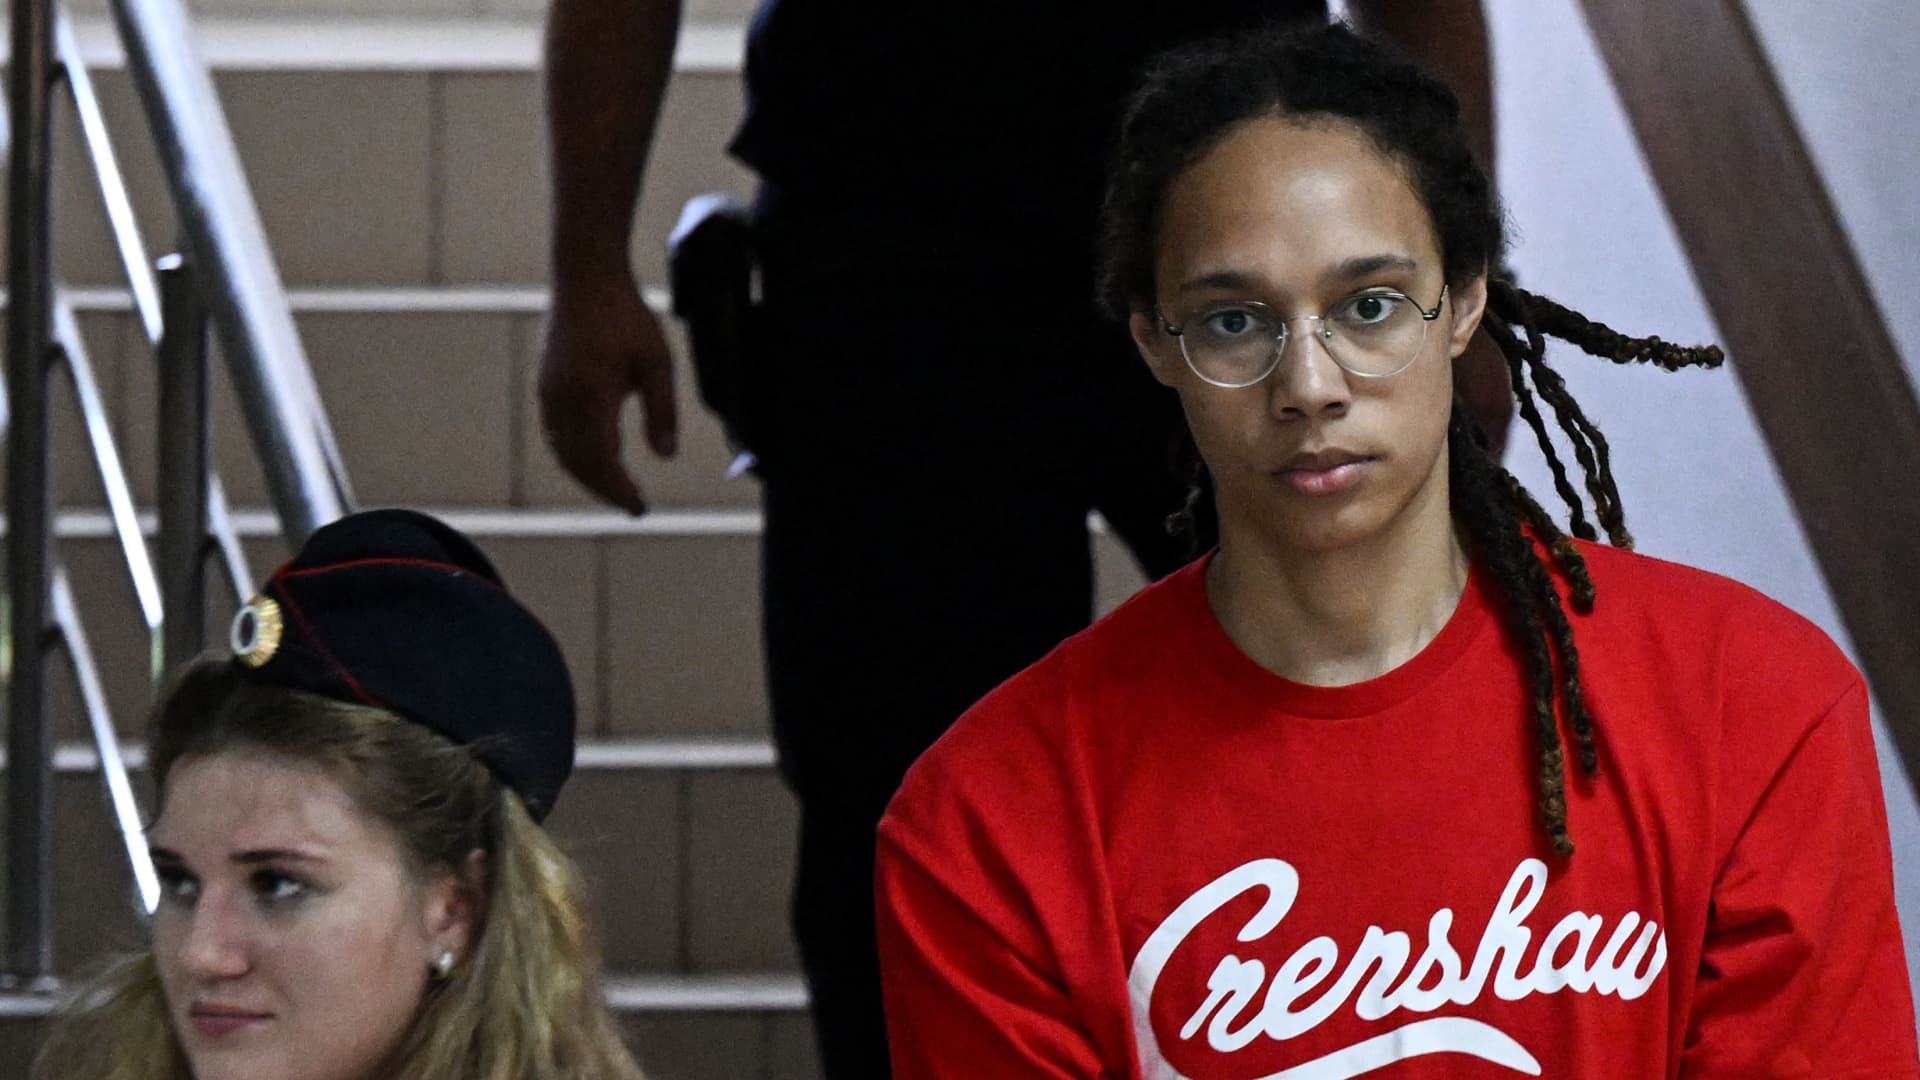 US WNBA basketball superstar Brittney Griner arrives to a hearing at the Khimki Court, outside Moscow on July 7, 2022.